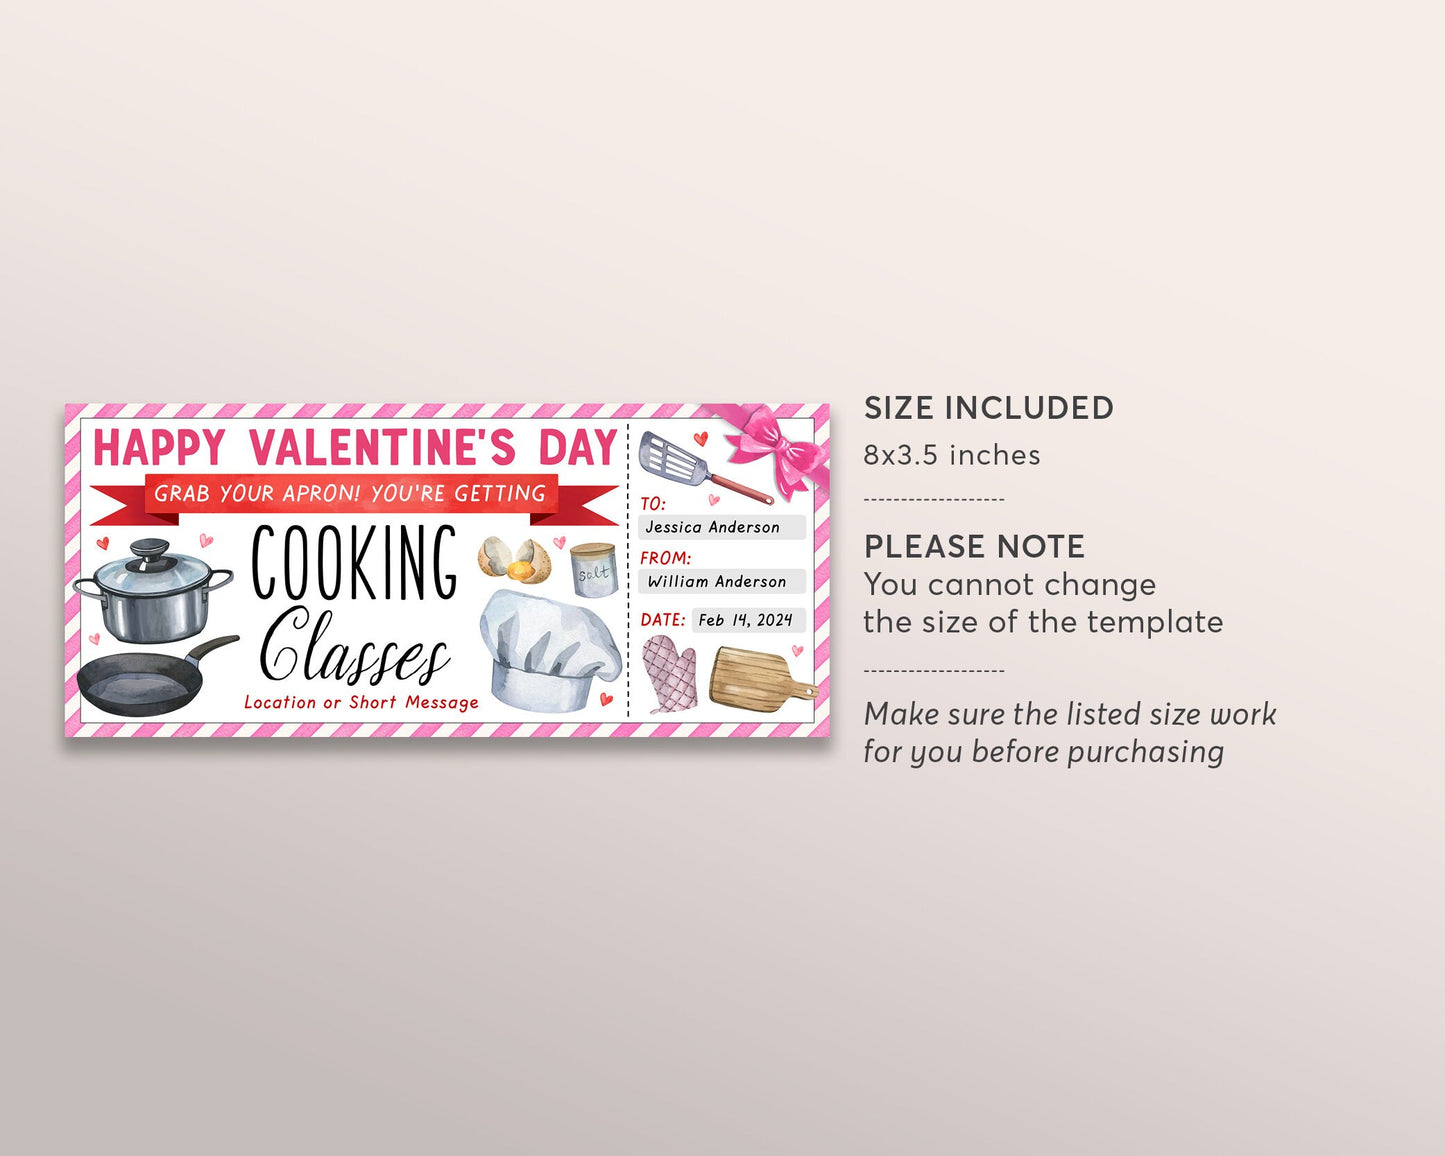 Valentines Day Cooking Classes Gift Certificate Ticket Editable Template, Anniversary Surprise Cooking Lessons Experience Gift Voucher